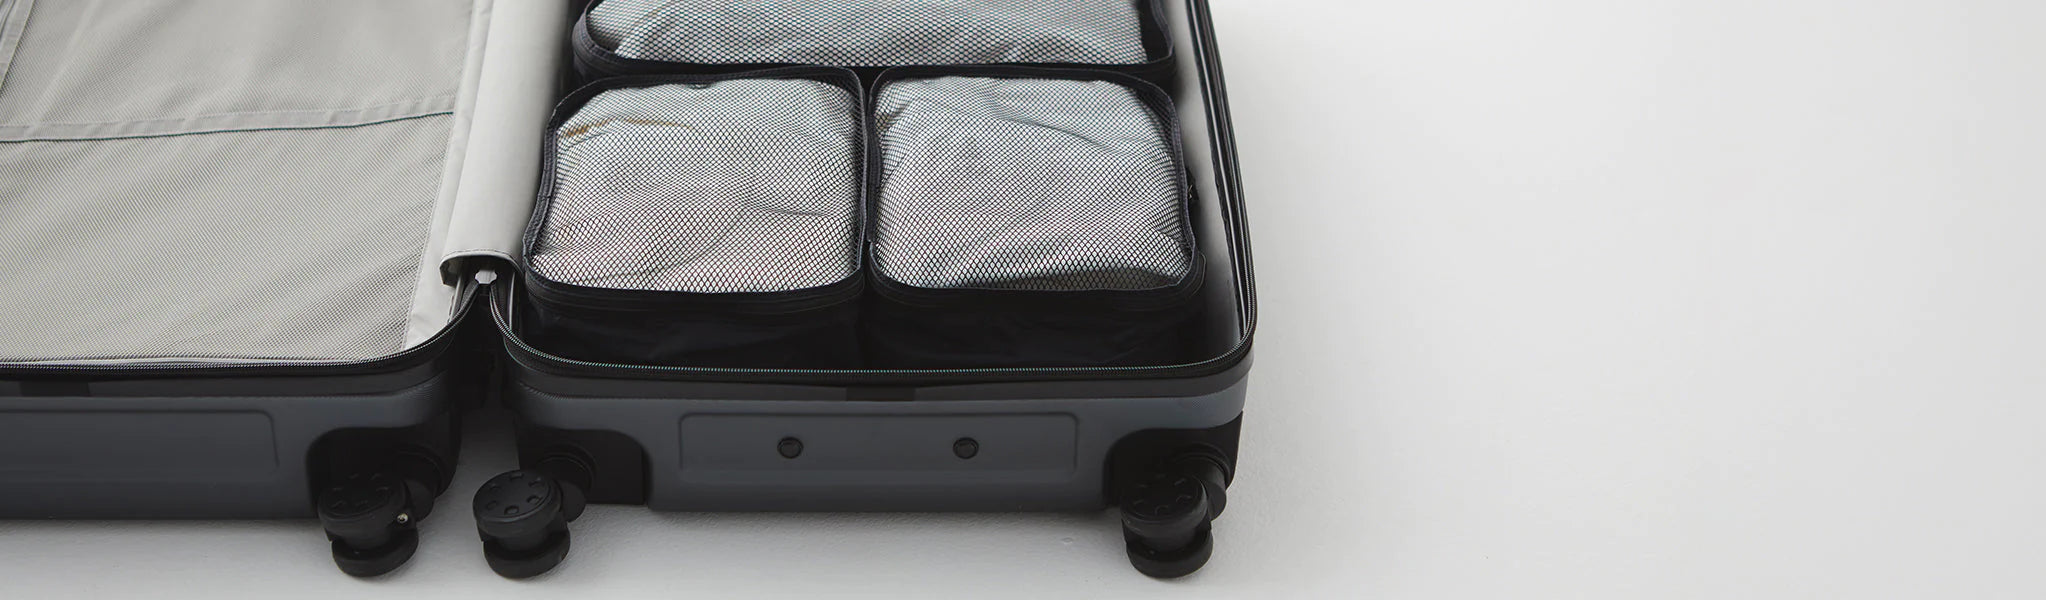 Packing Cubes | Garment Organization Cases